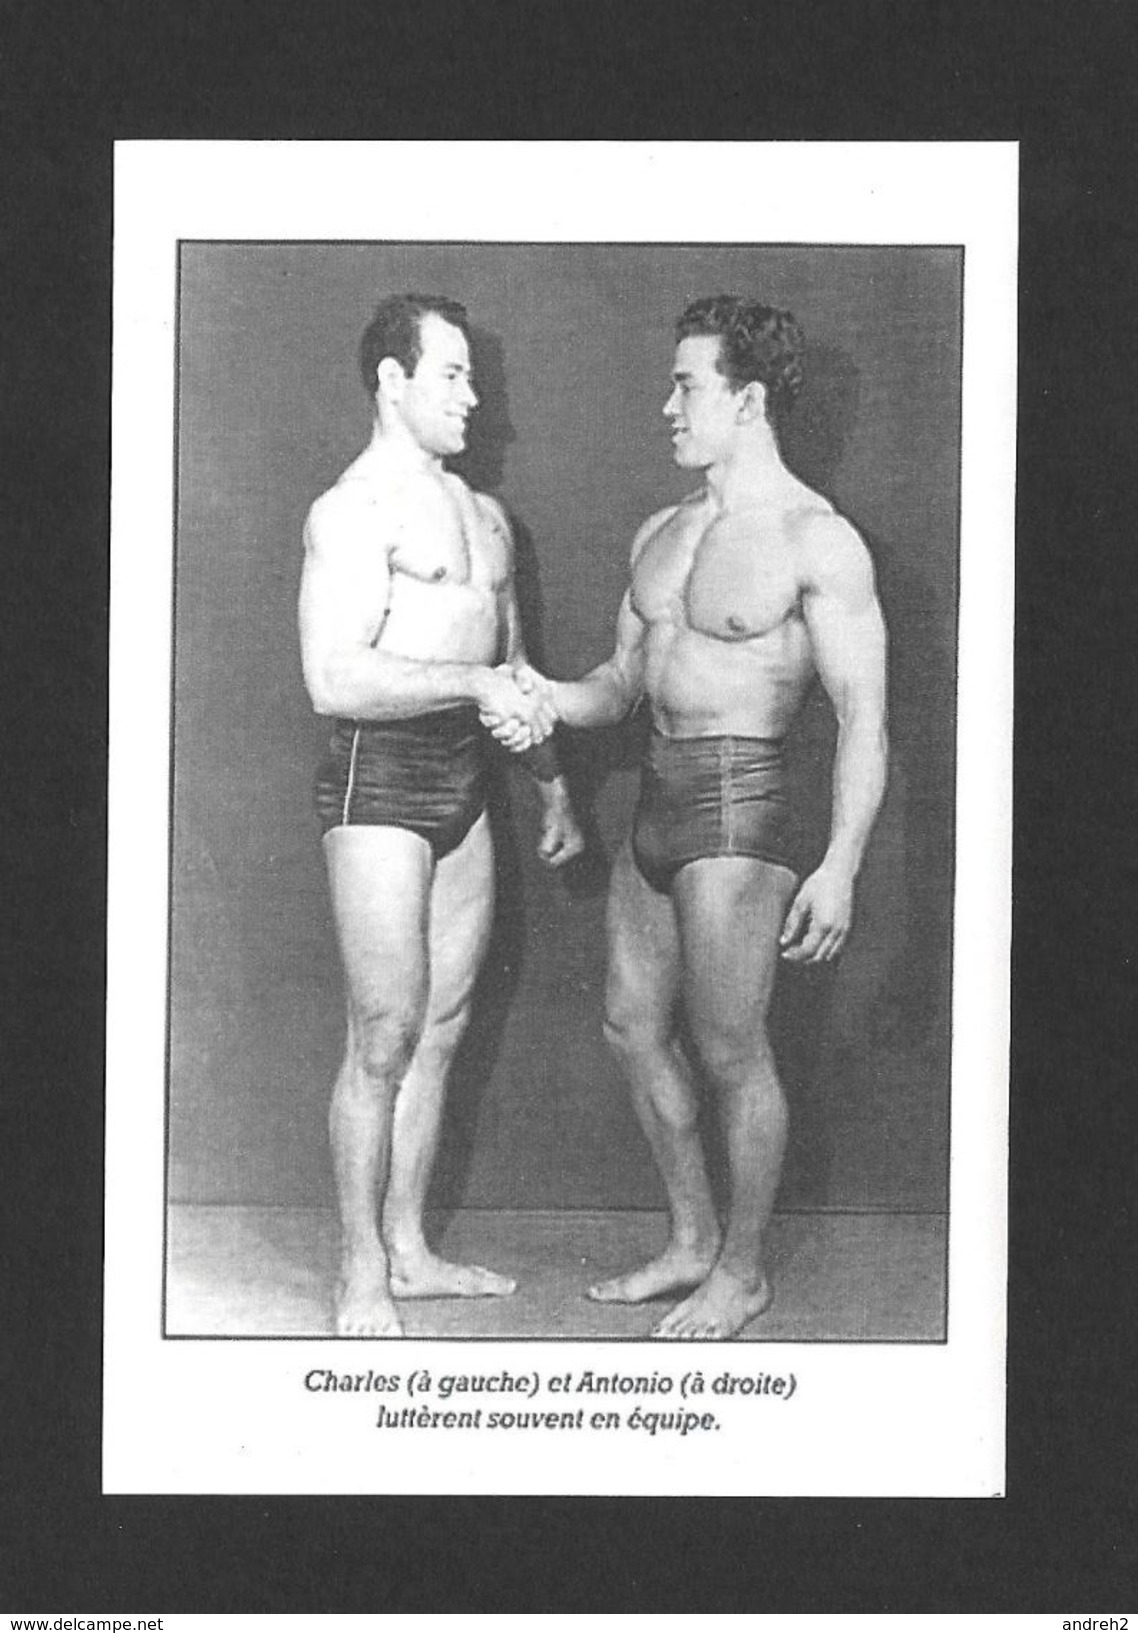 SPORTS - HALTÉROPHILIE - LUTTEURS - CHARLES ET ANTONIO BAILLARGEON - 2 FRÈRES BAILLARGEON - HOMMES FORTS ST MAGLOIRE QC. - Weightlifting